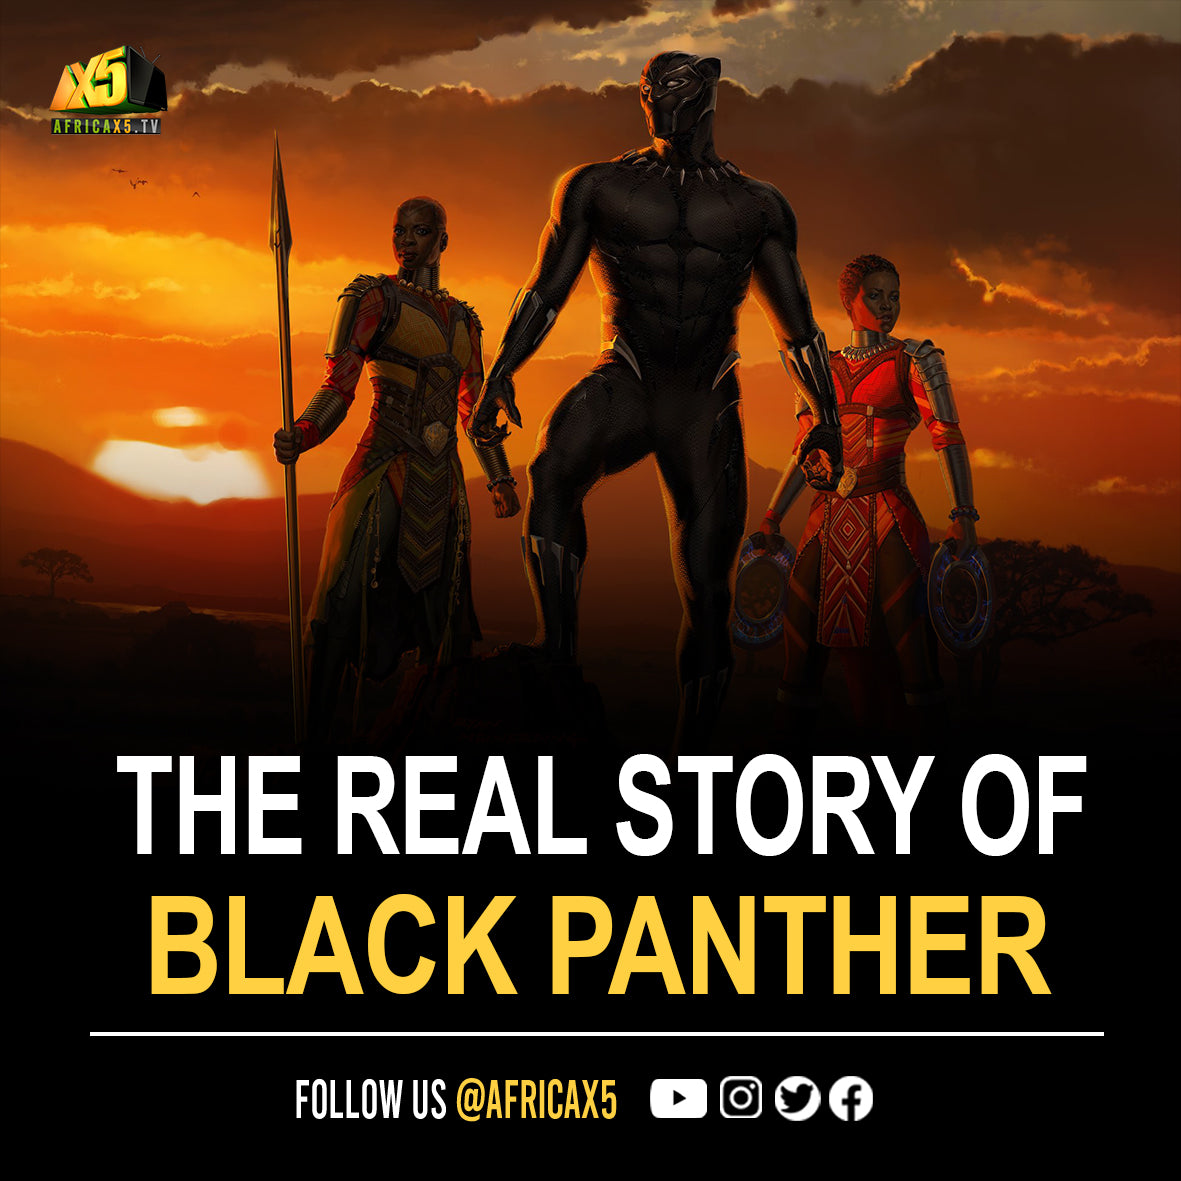 THE REAL STORY OF THE BLACK PANTHER